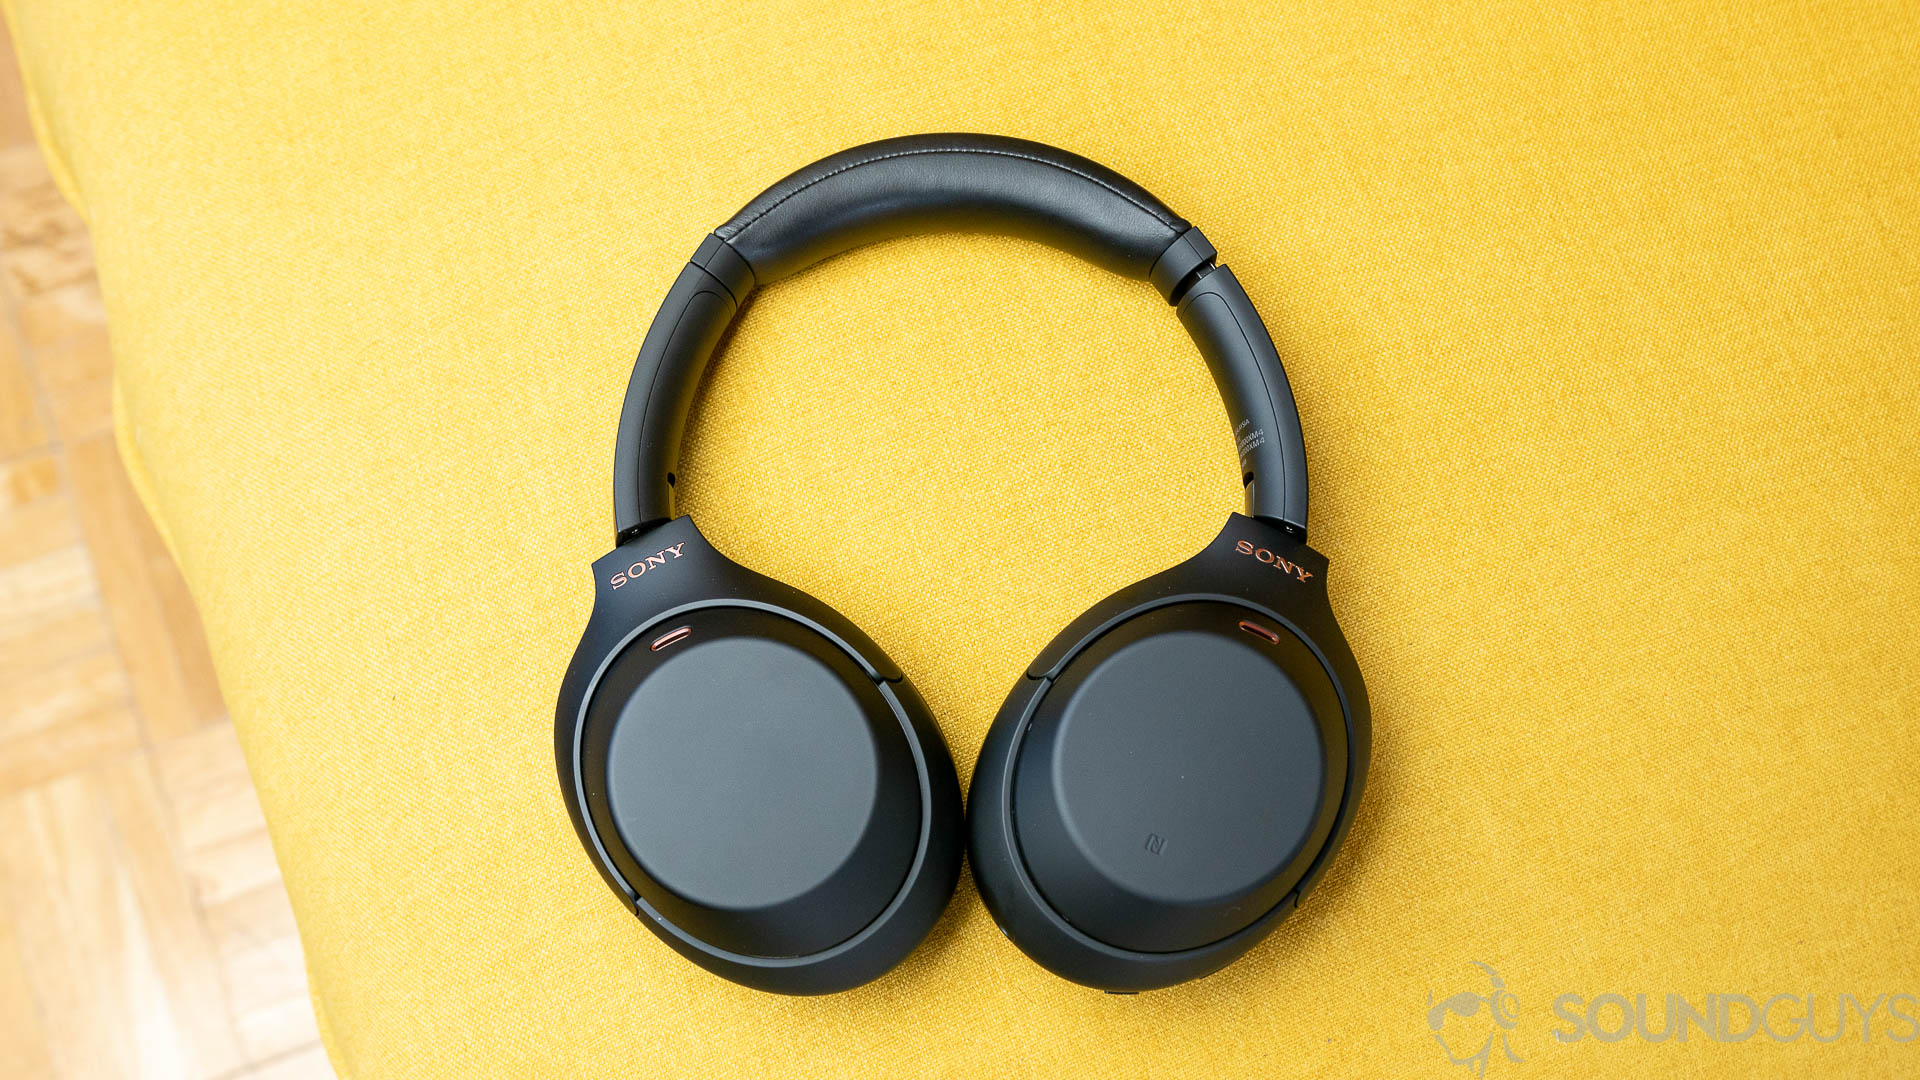 An aerial photo of the Sony WH 1000XM4 noise cancelling headphones full yellow backdrop.